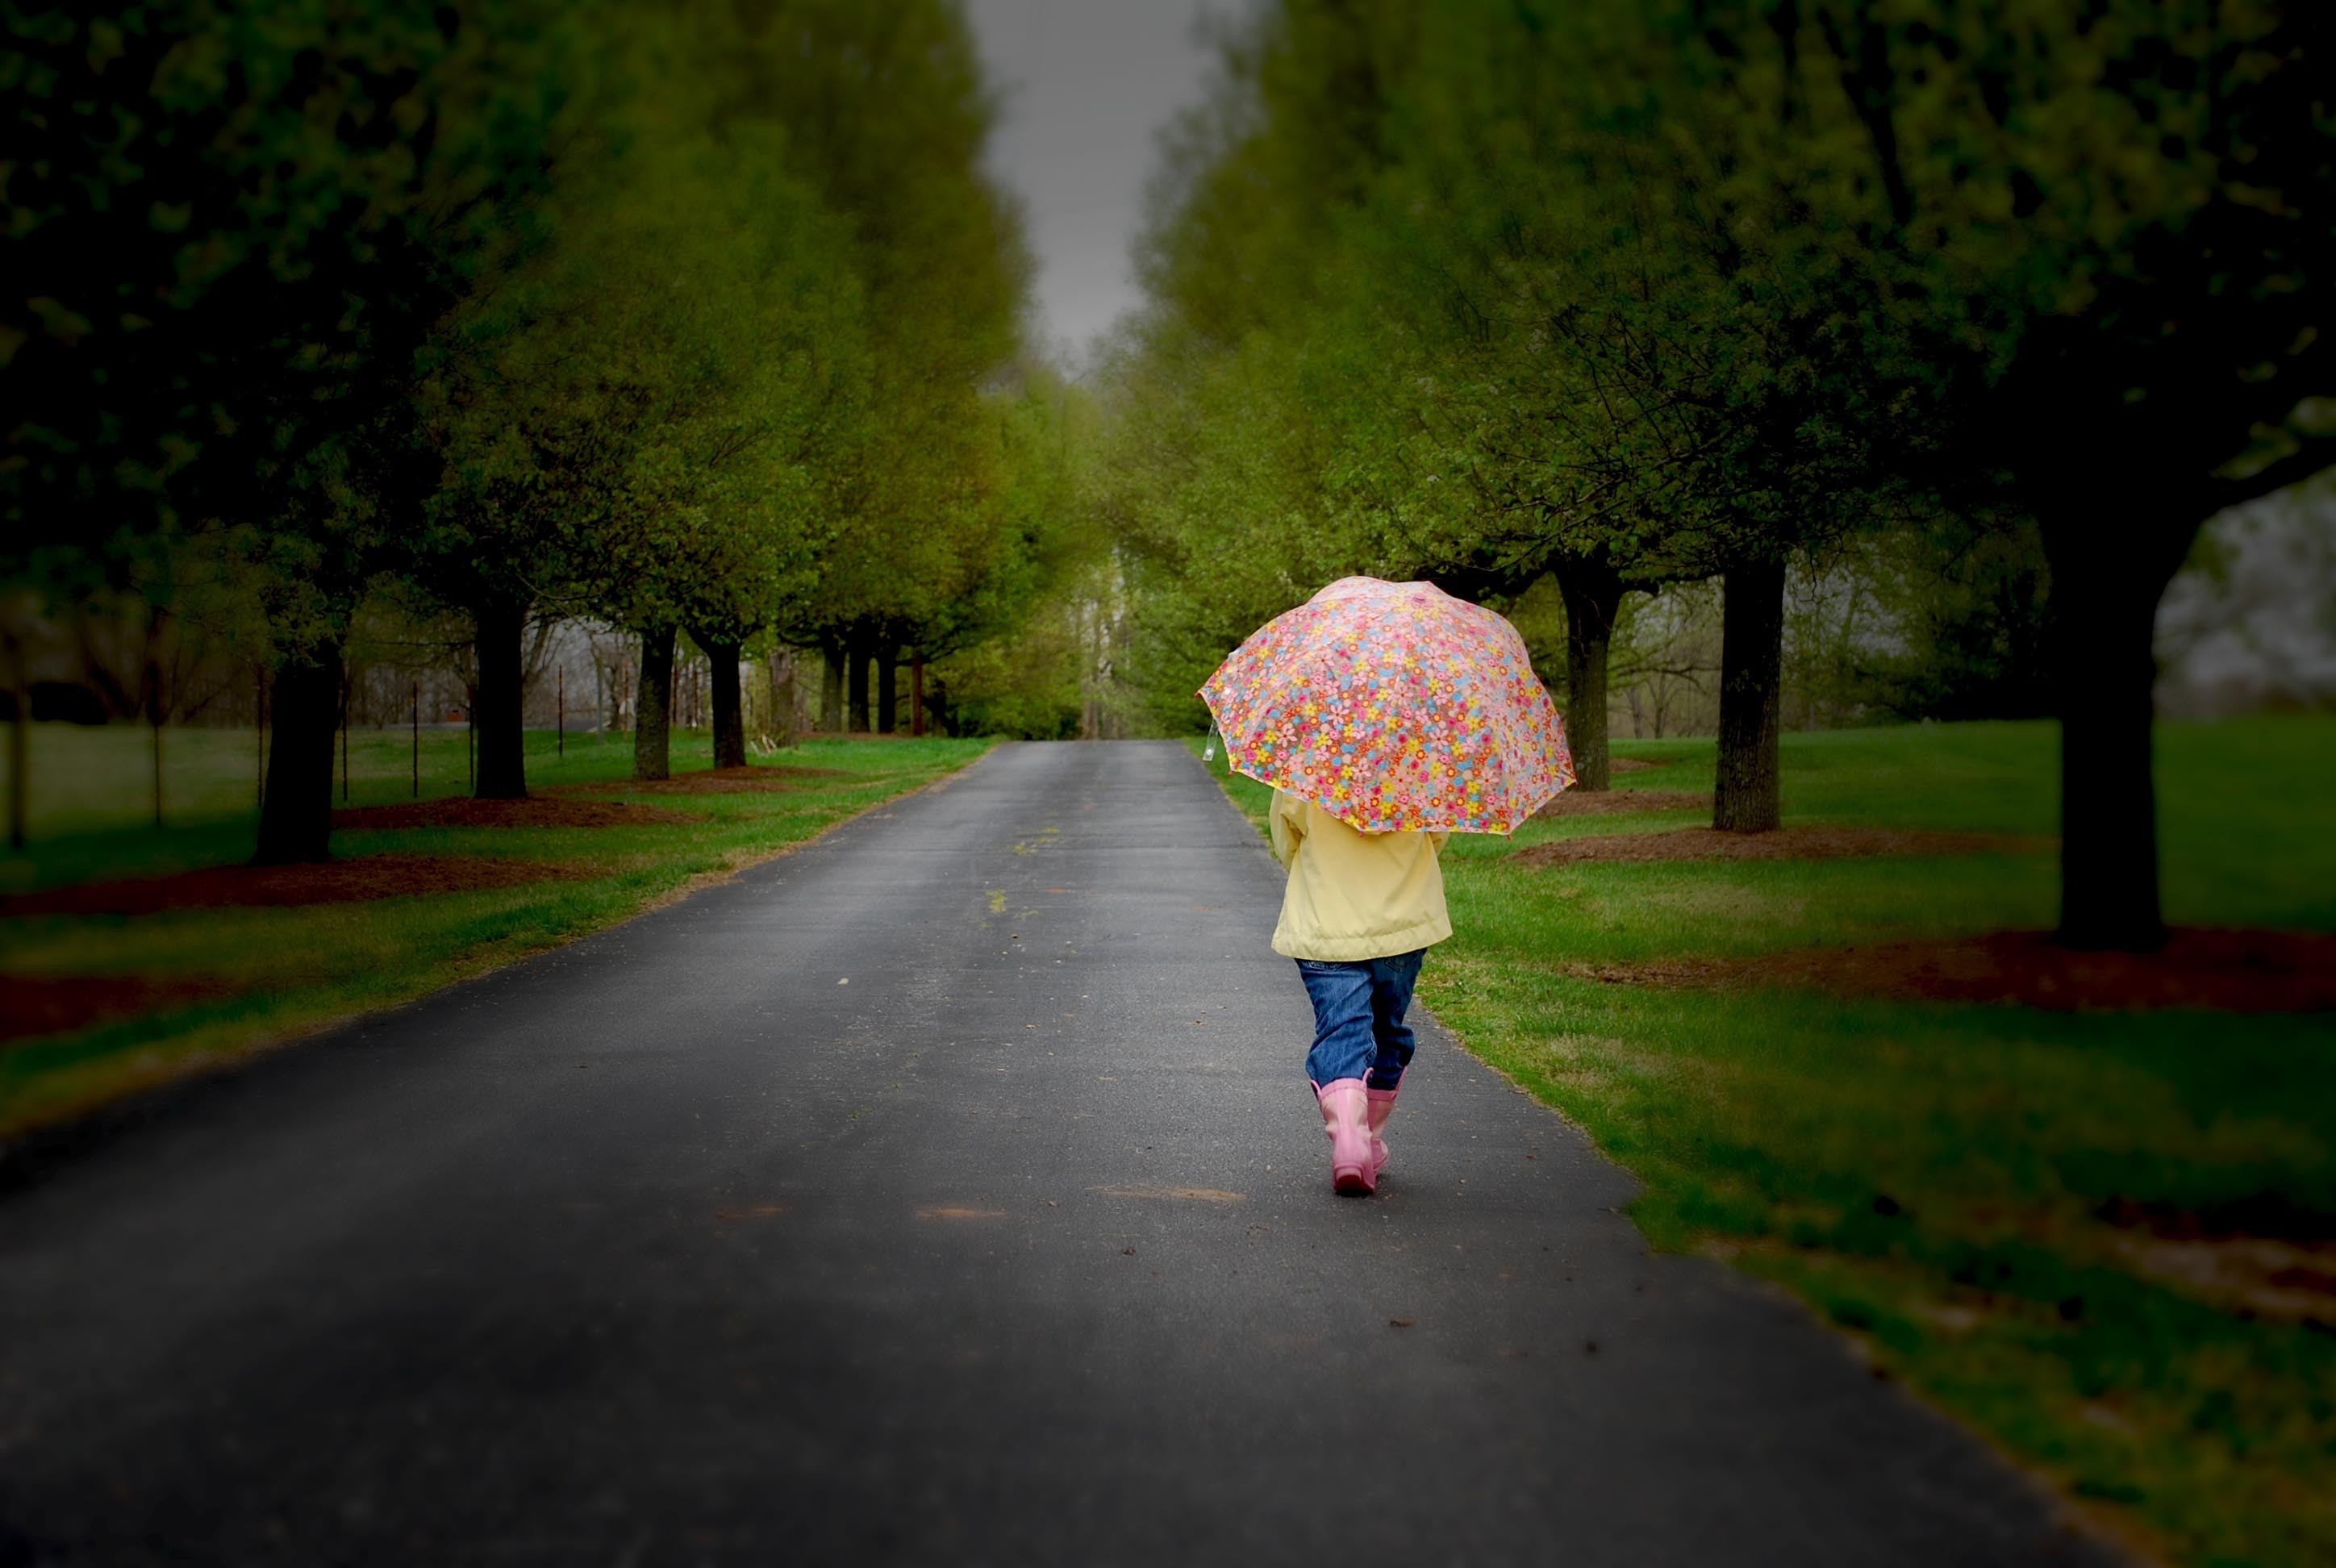 miscellanea, miscellaneous, wood, road, park, tree, stroll, mainly cloudy, overcast, umbrella